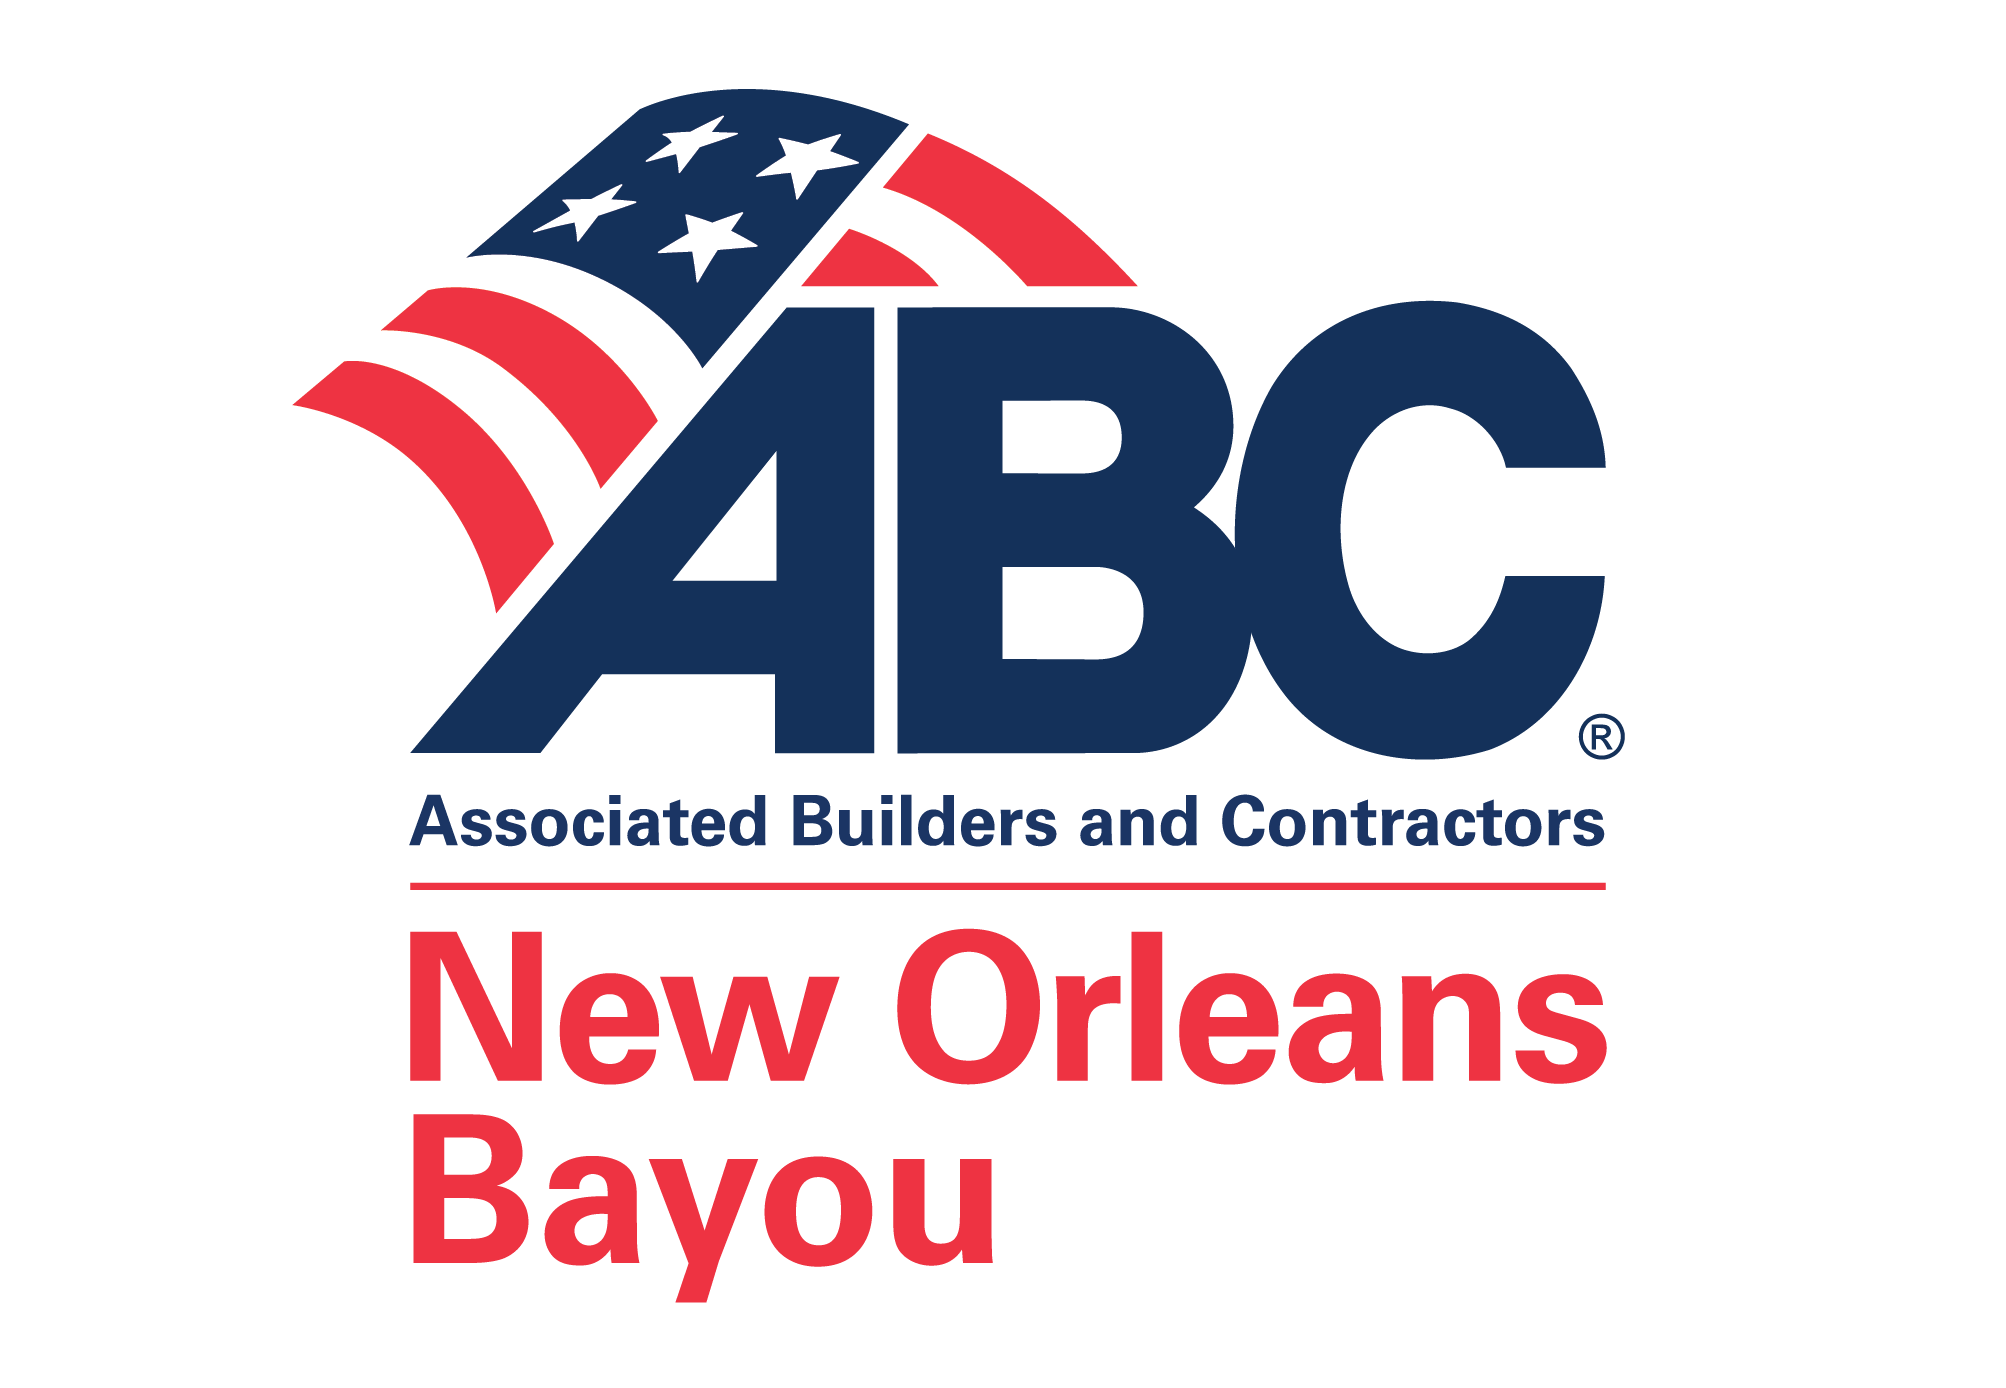 Associated Builders and Contractors - Bayou Chapter